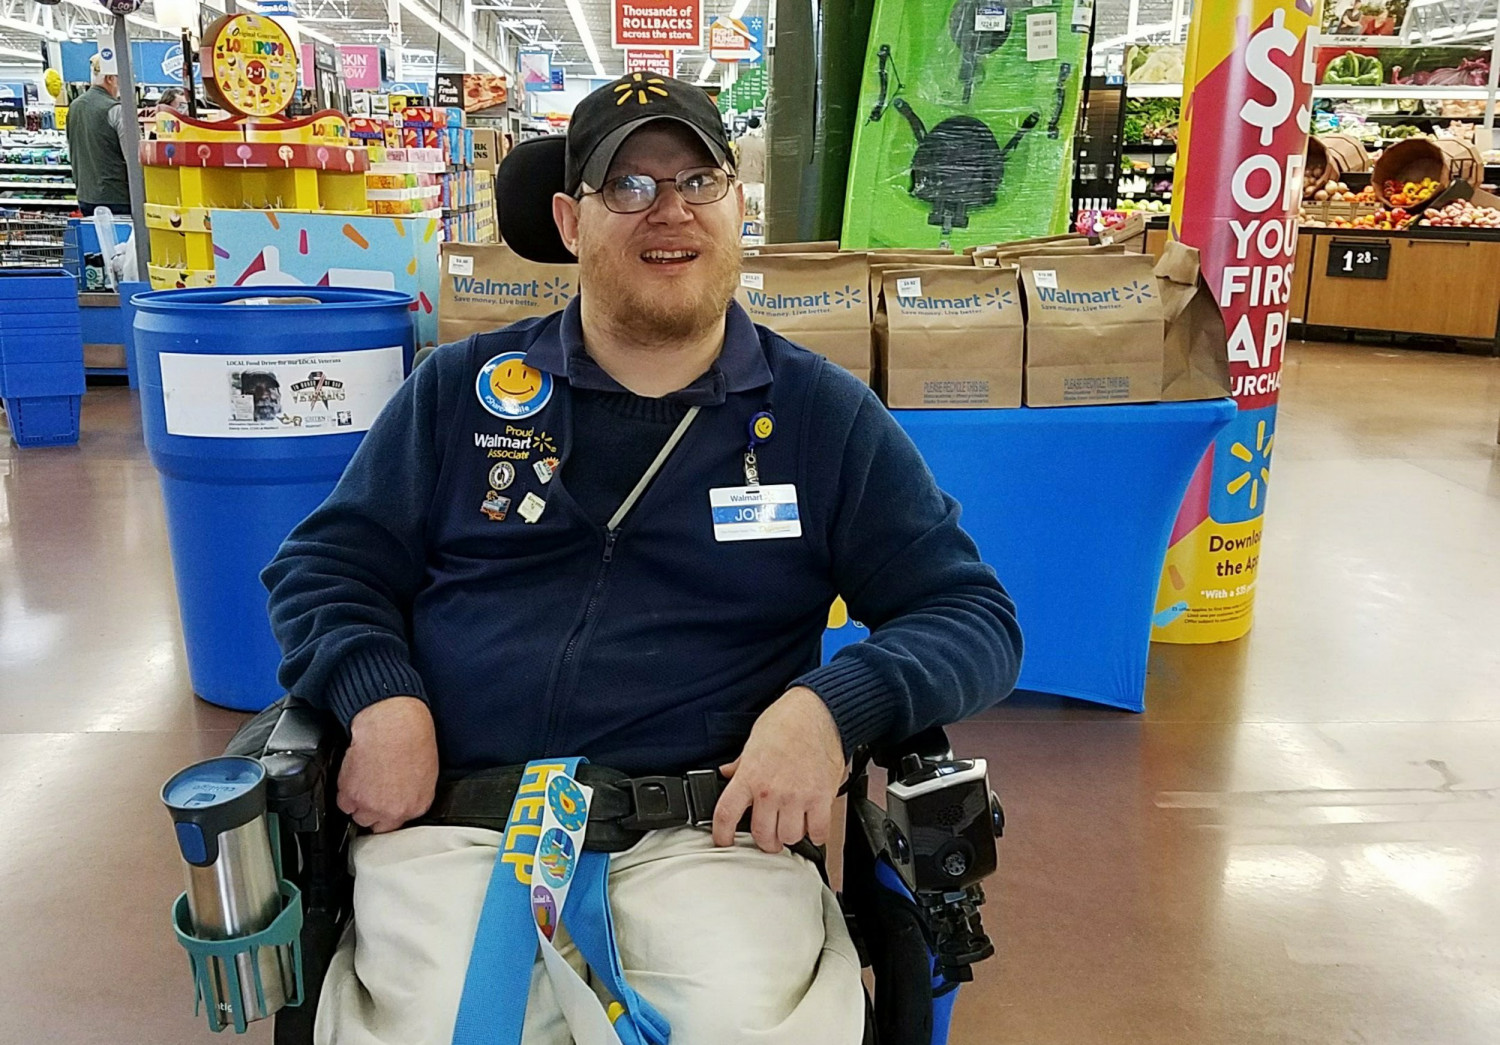 Walmart Is Getting Rid of Greeters, Disabled Workers Worried